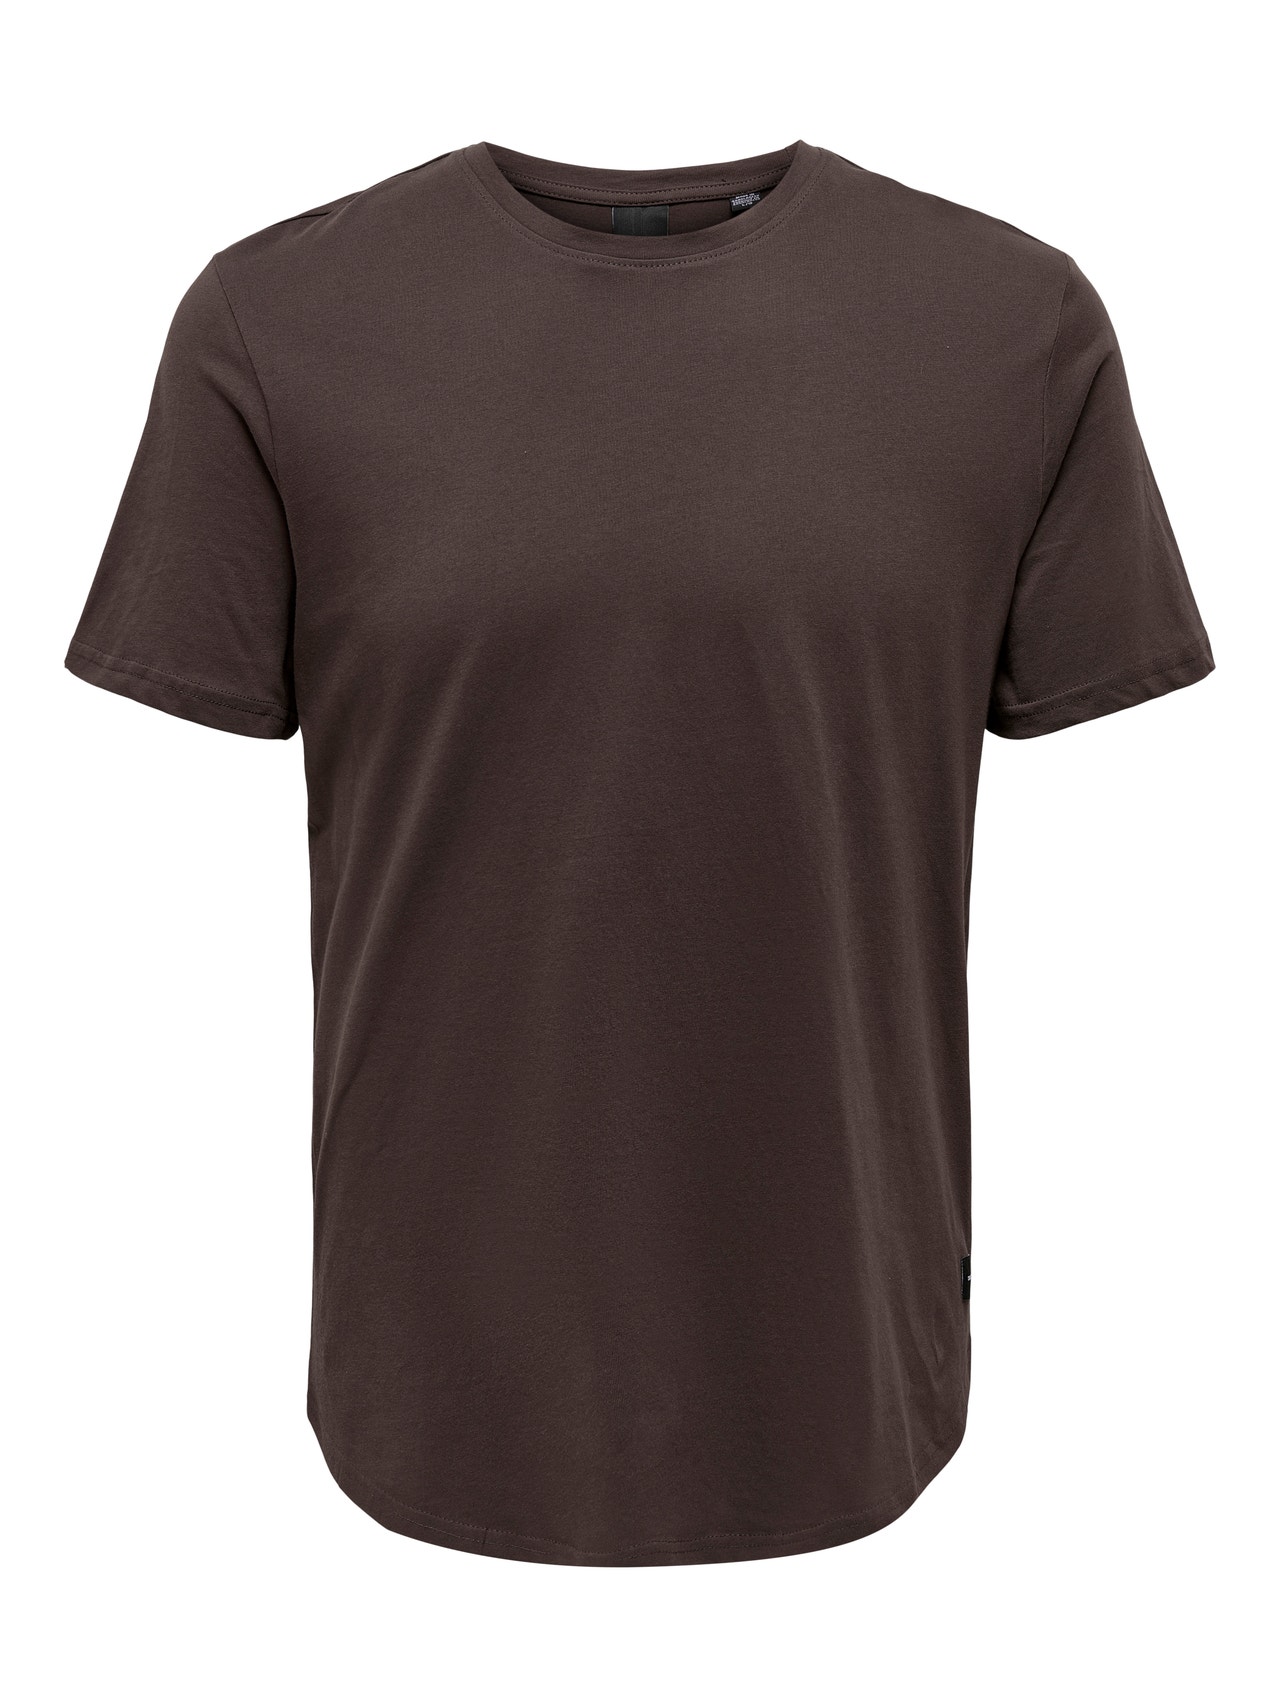 ONLY & SONS Long Line Fit O-hals T-skjorte -Seal Brown - 22002973